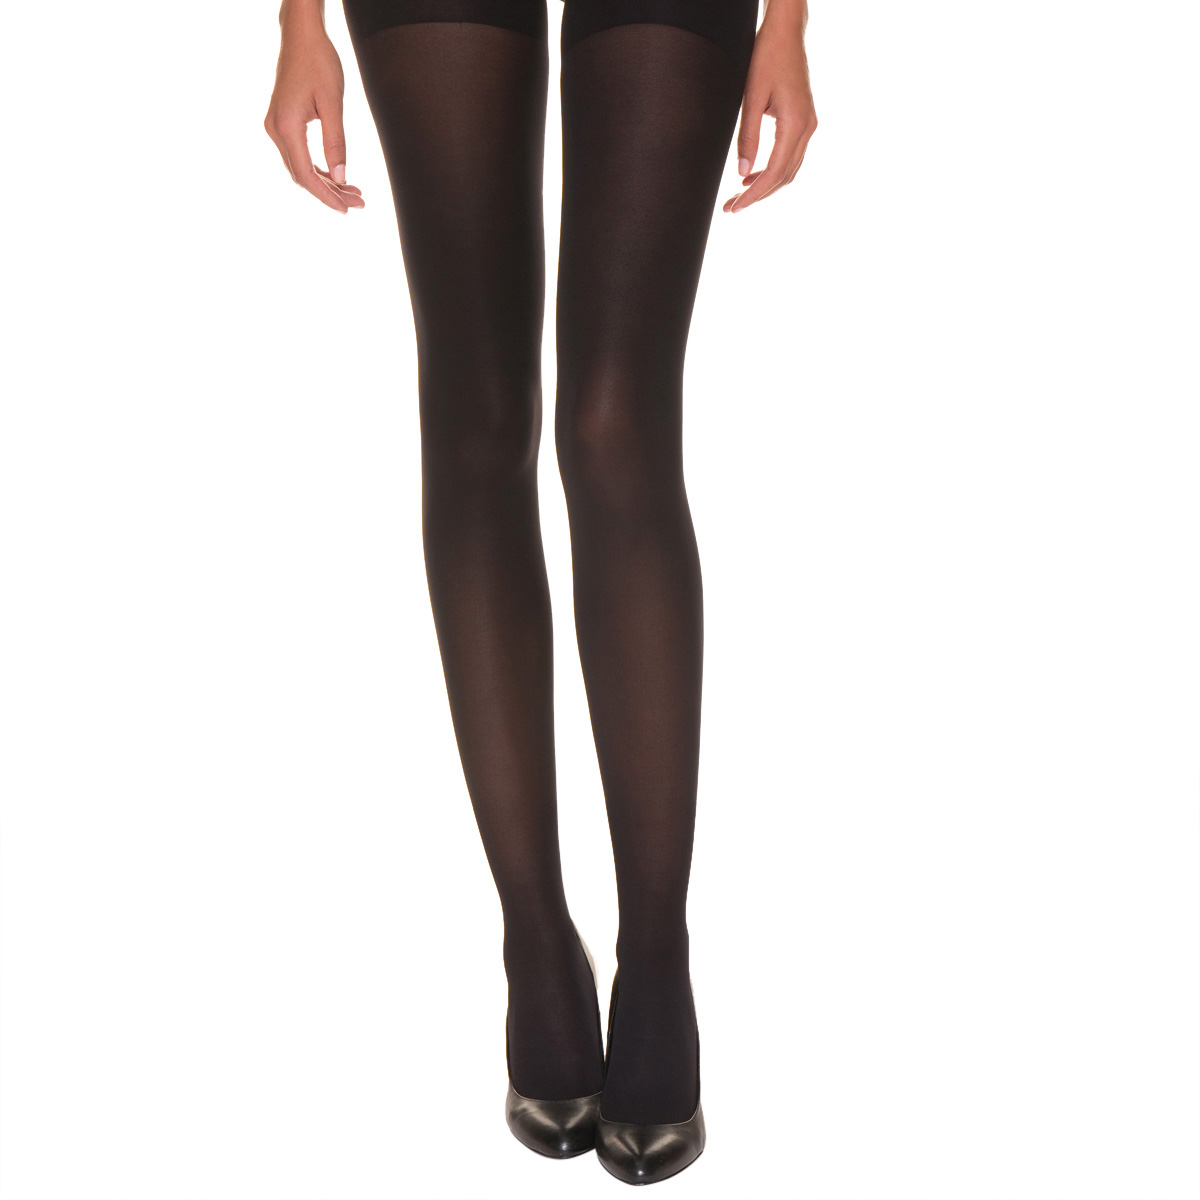 collants noirs opaques